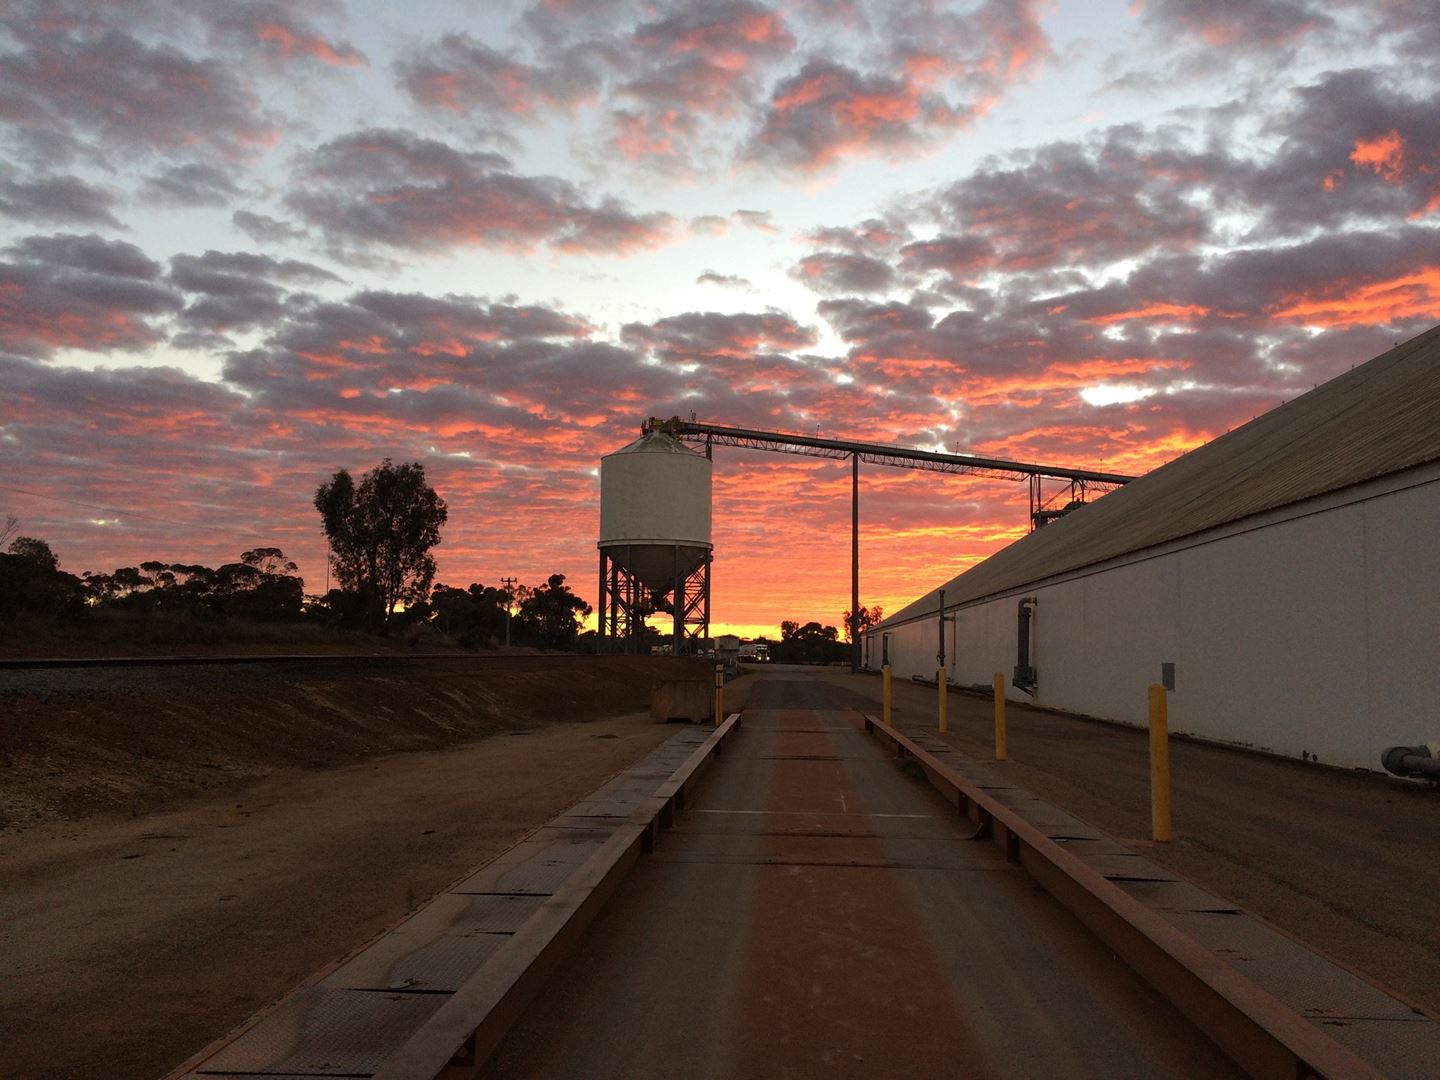 A spectacular orange and pink sunset over the CBH Kulin site